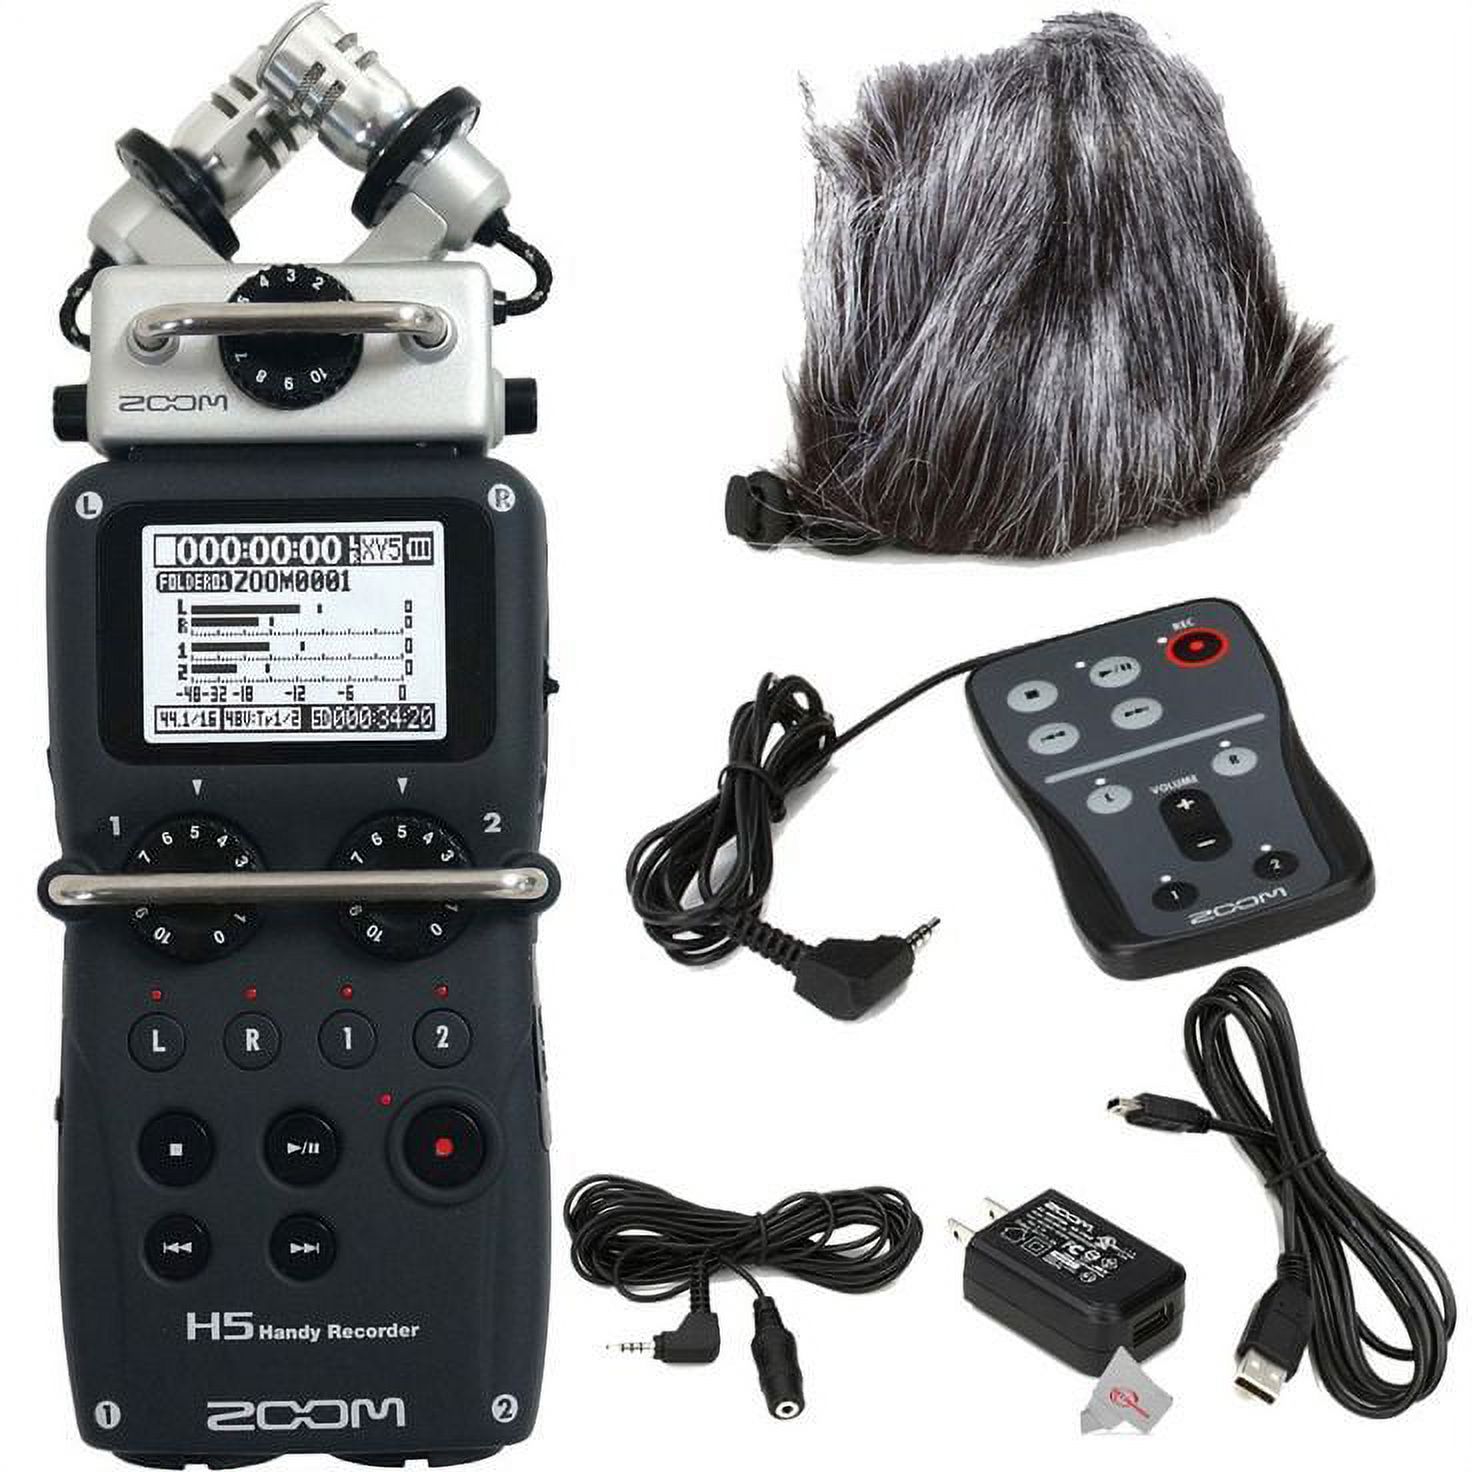 Zoom H5 4-Input / 4-Track Portable Handy Digital Recorder + ZOOM H5 Accessory Pack - image 1 of 4